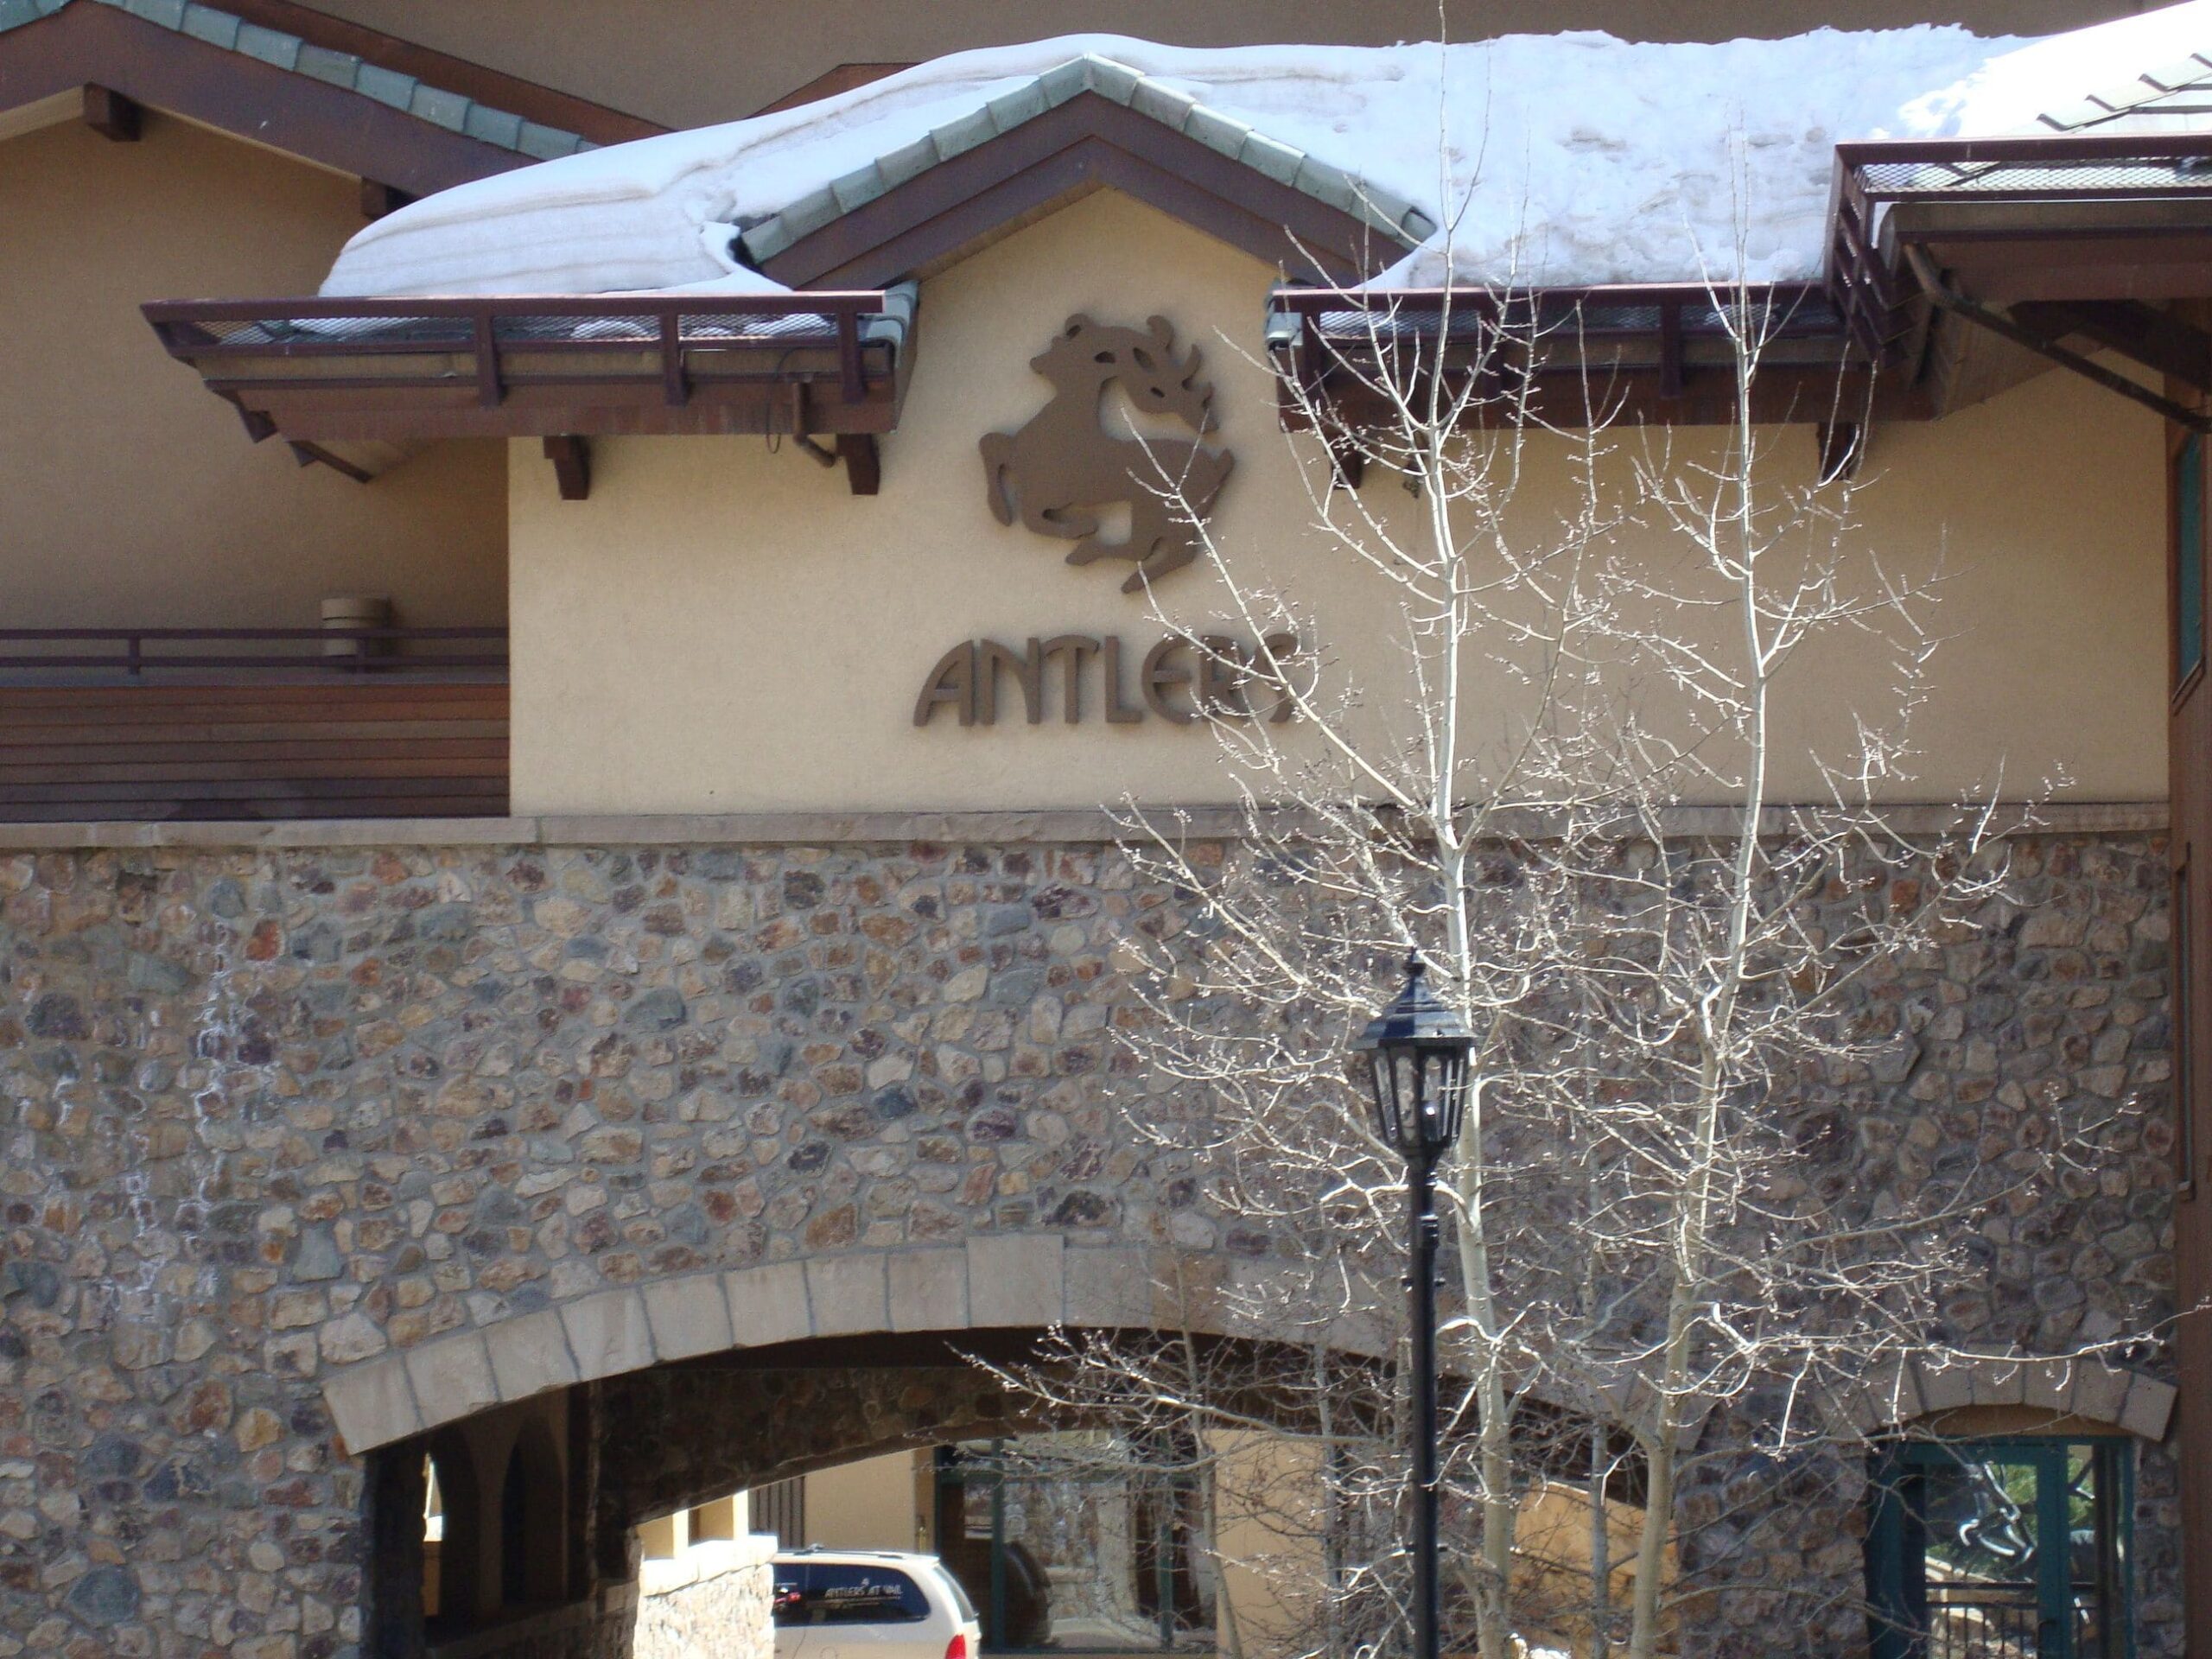 Close up view of the Antlers logo.